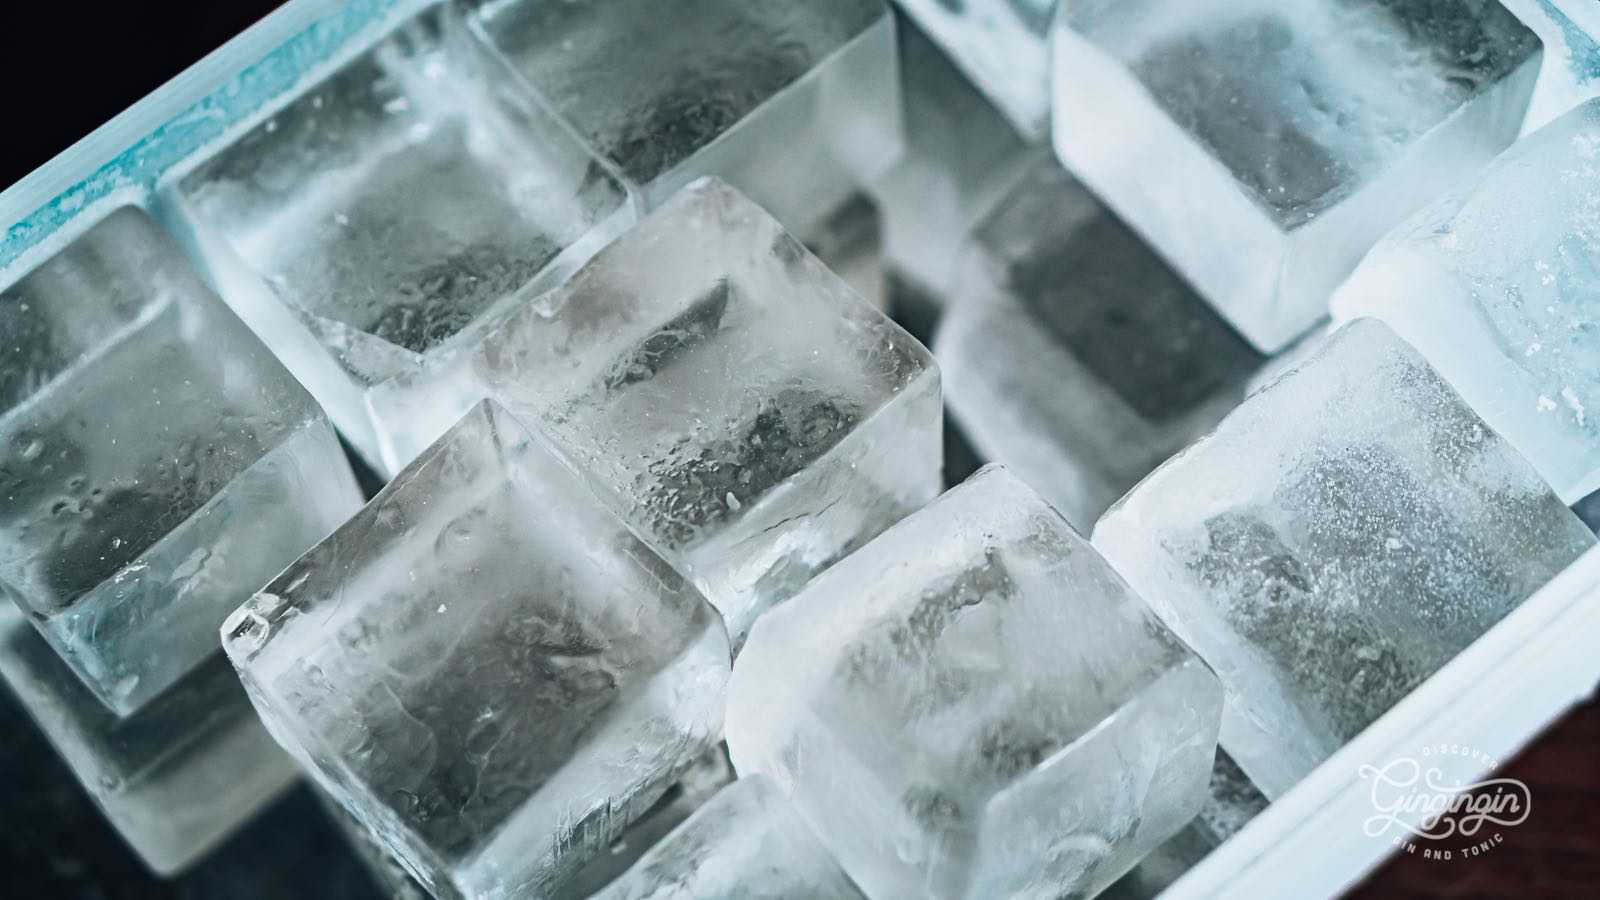 http://liquorlabs.tv/assets/content/clear-ice-cubes.jpeg